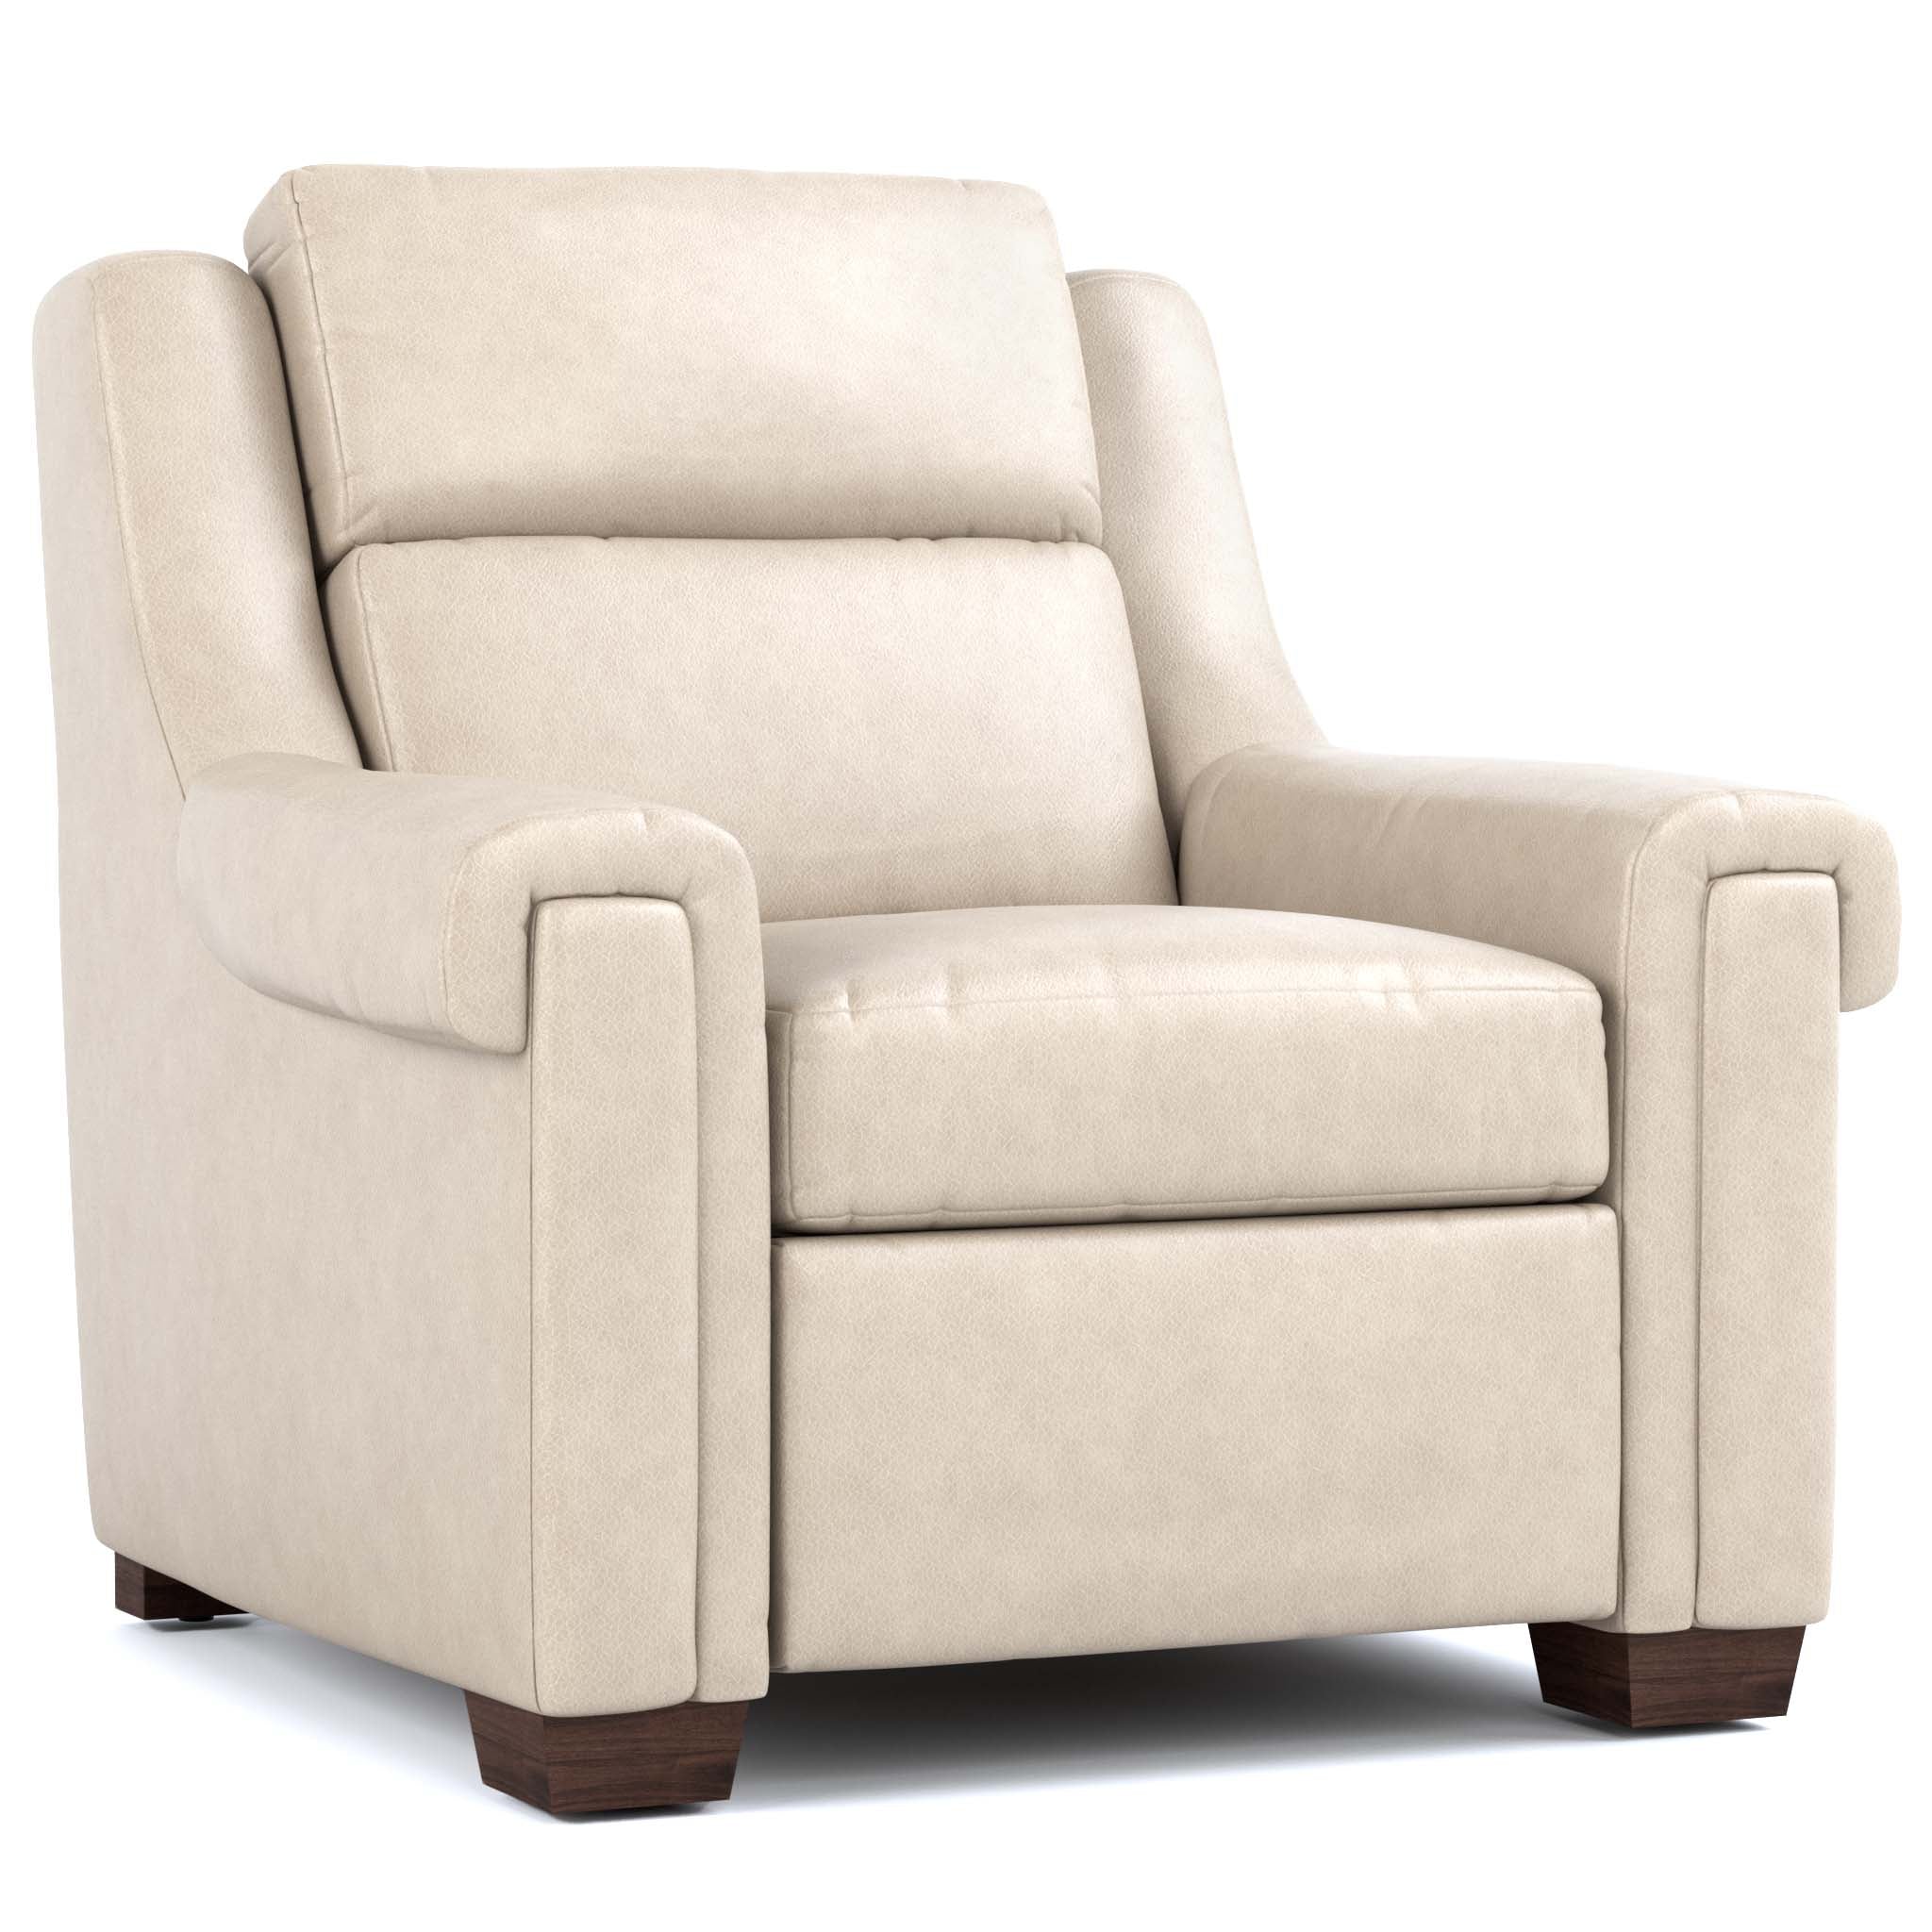 Sorrento Recliner Armchair, Slate Grey Classic Plush Fabric Only